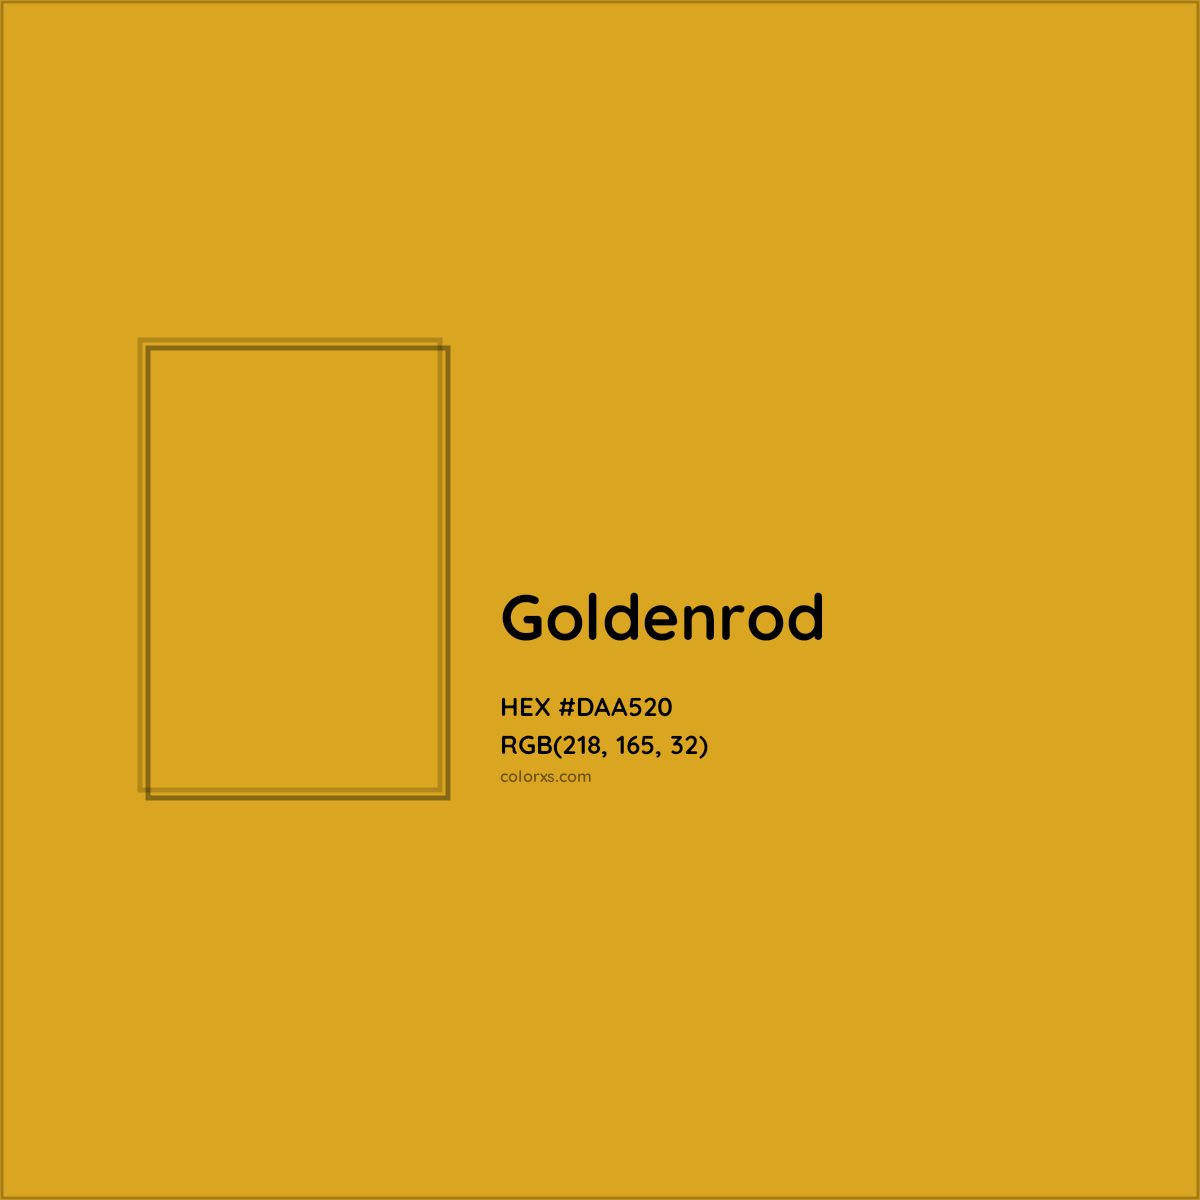 HEX #DAA520 Goldenrod Color - Color Code